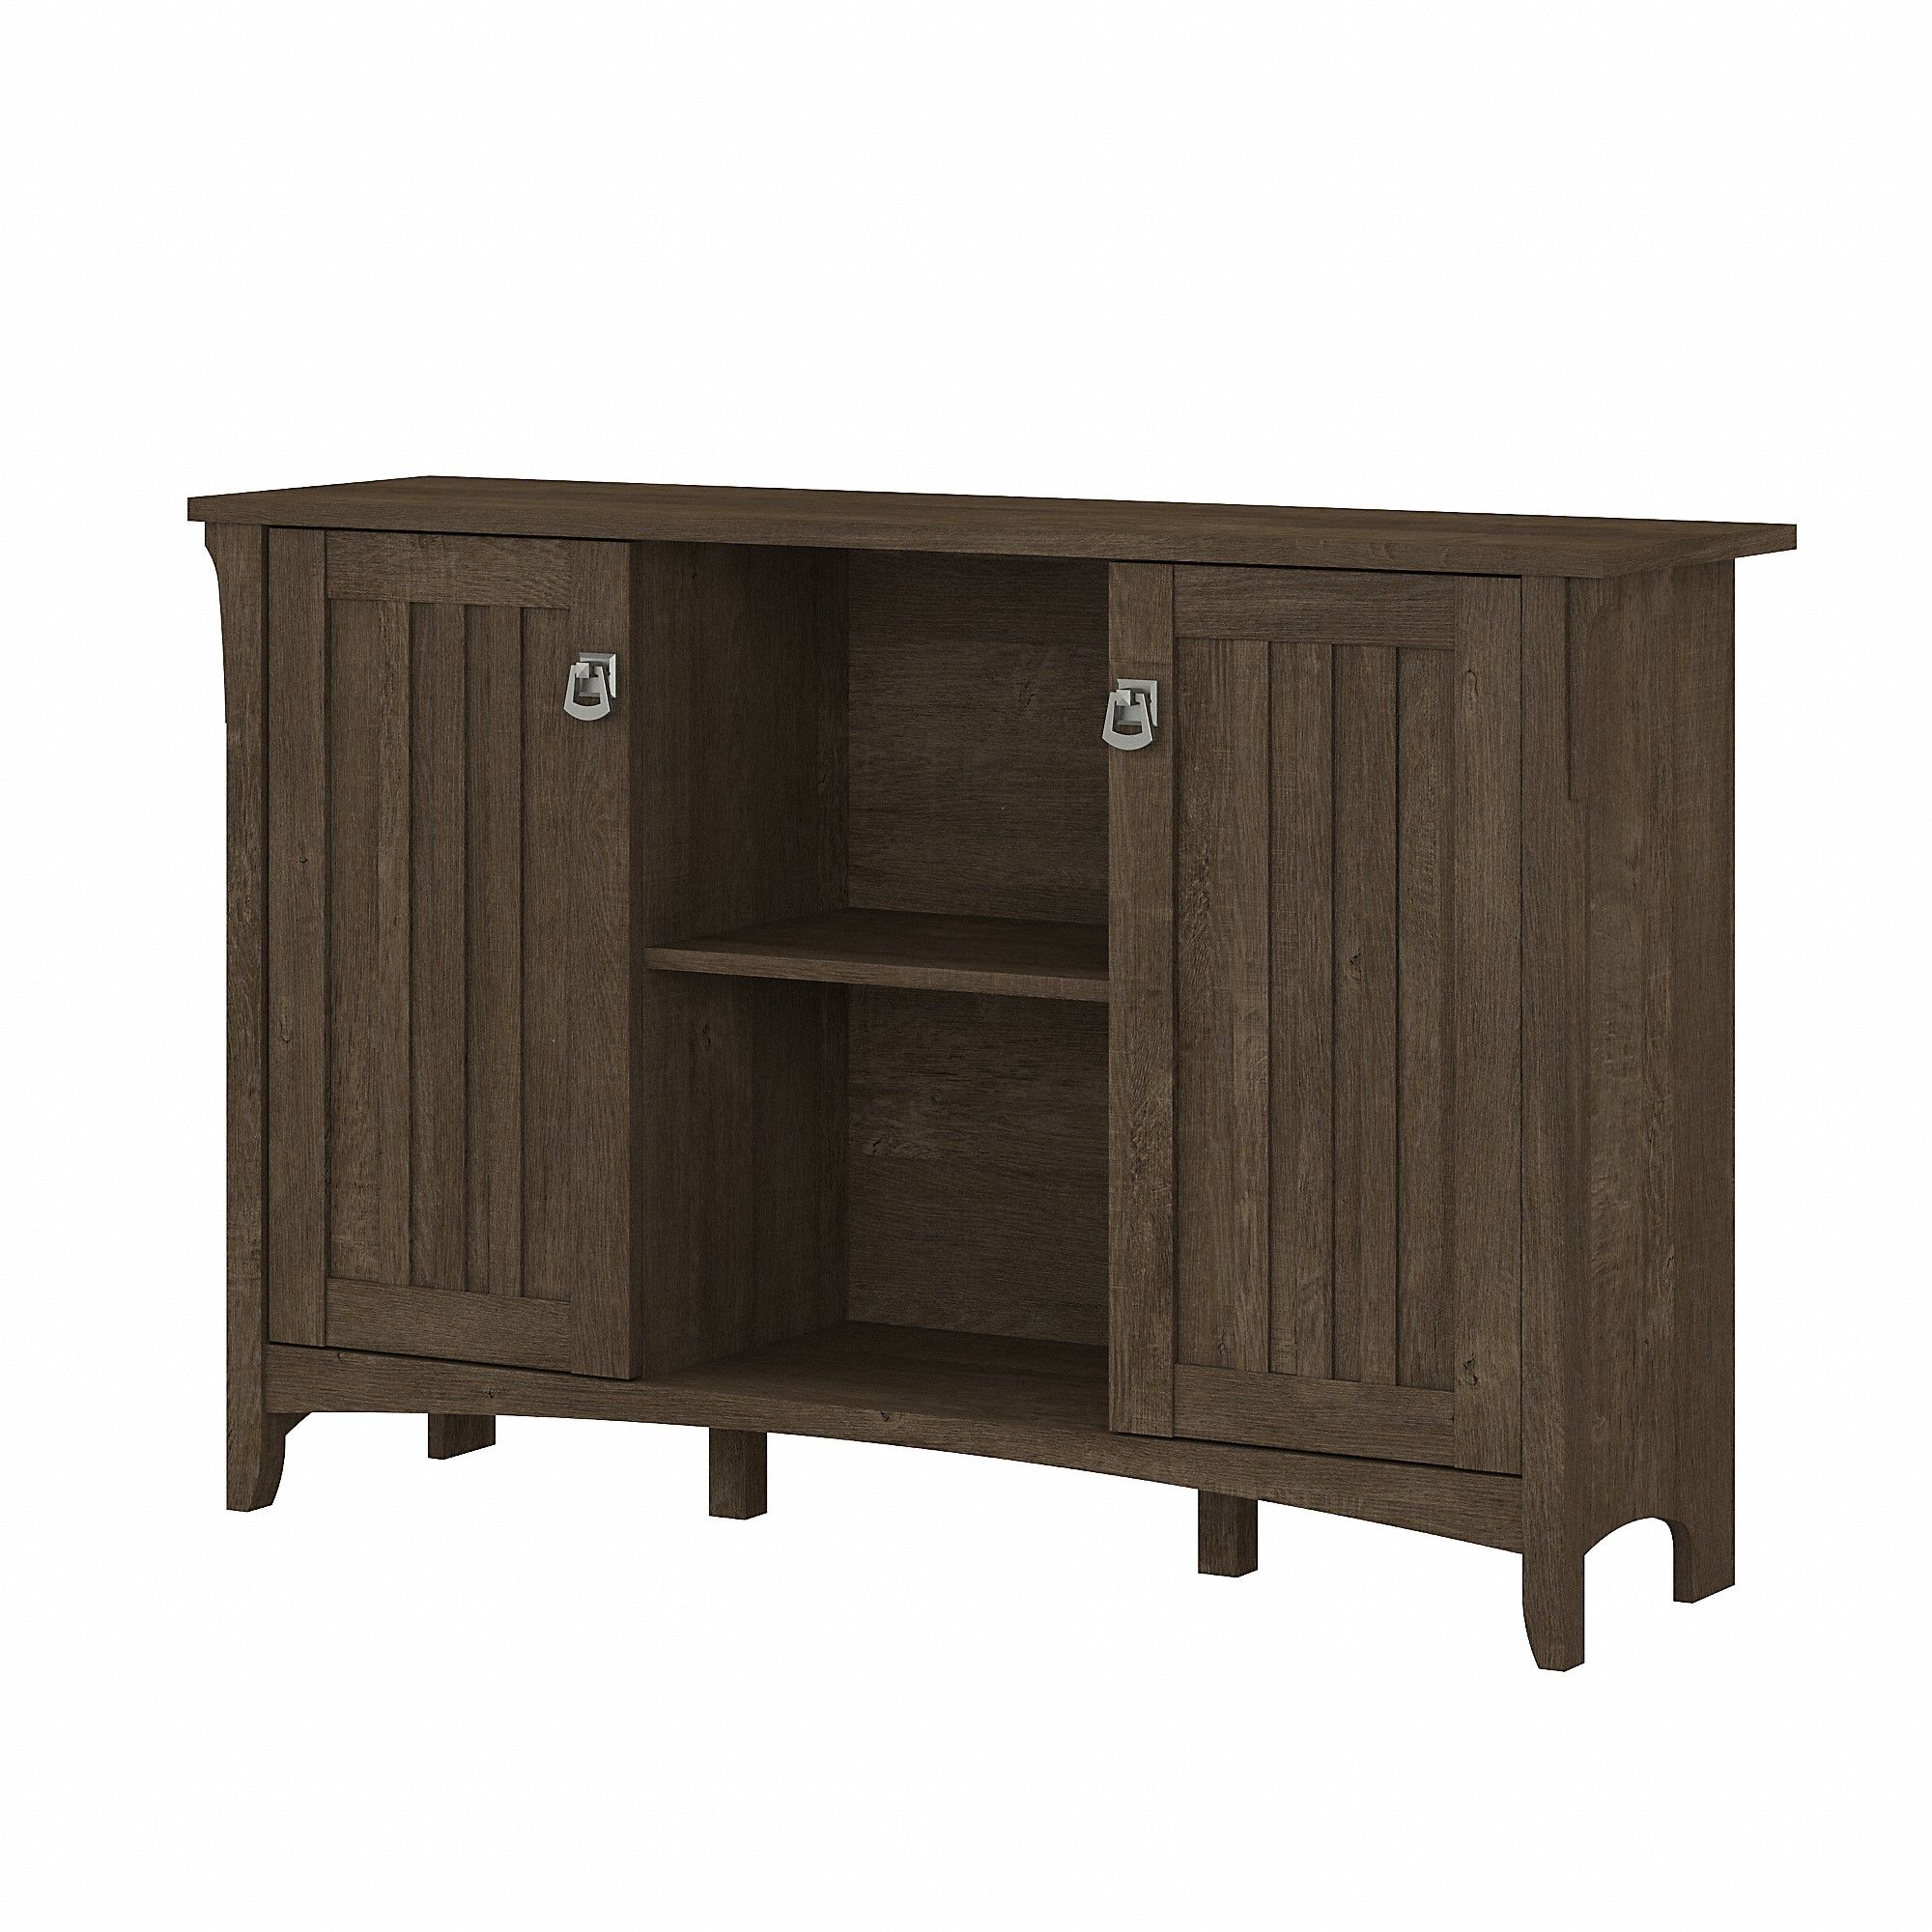 Furniture Salinas Accent Storage Cabinet with Doors in Ash Brown by Bush